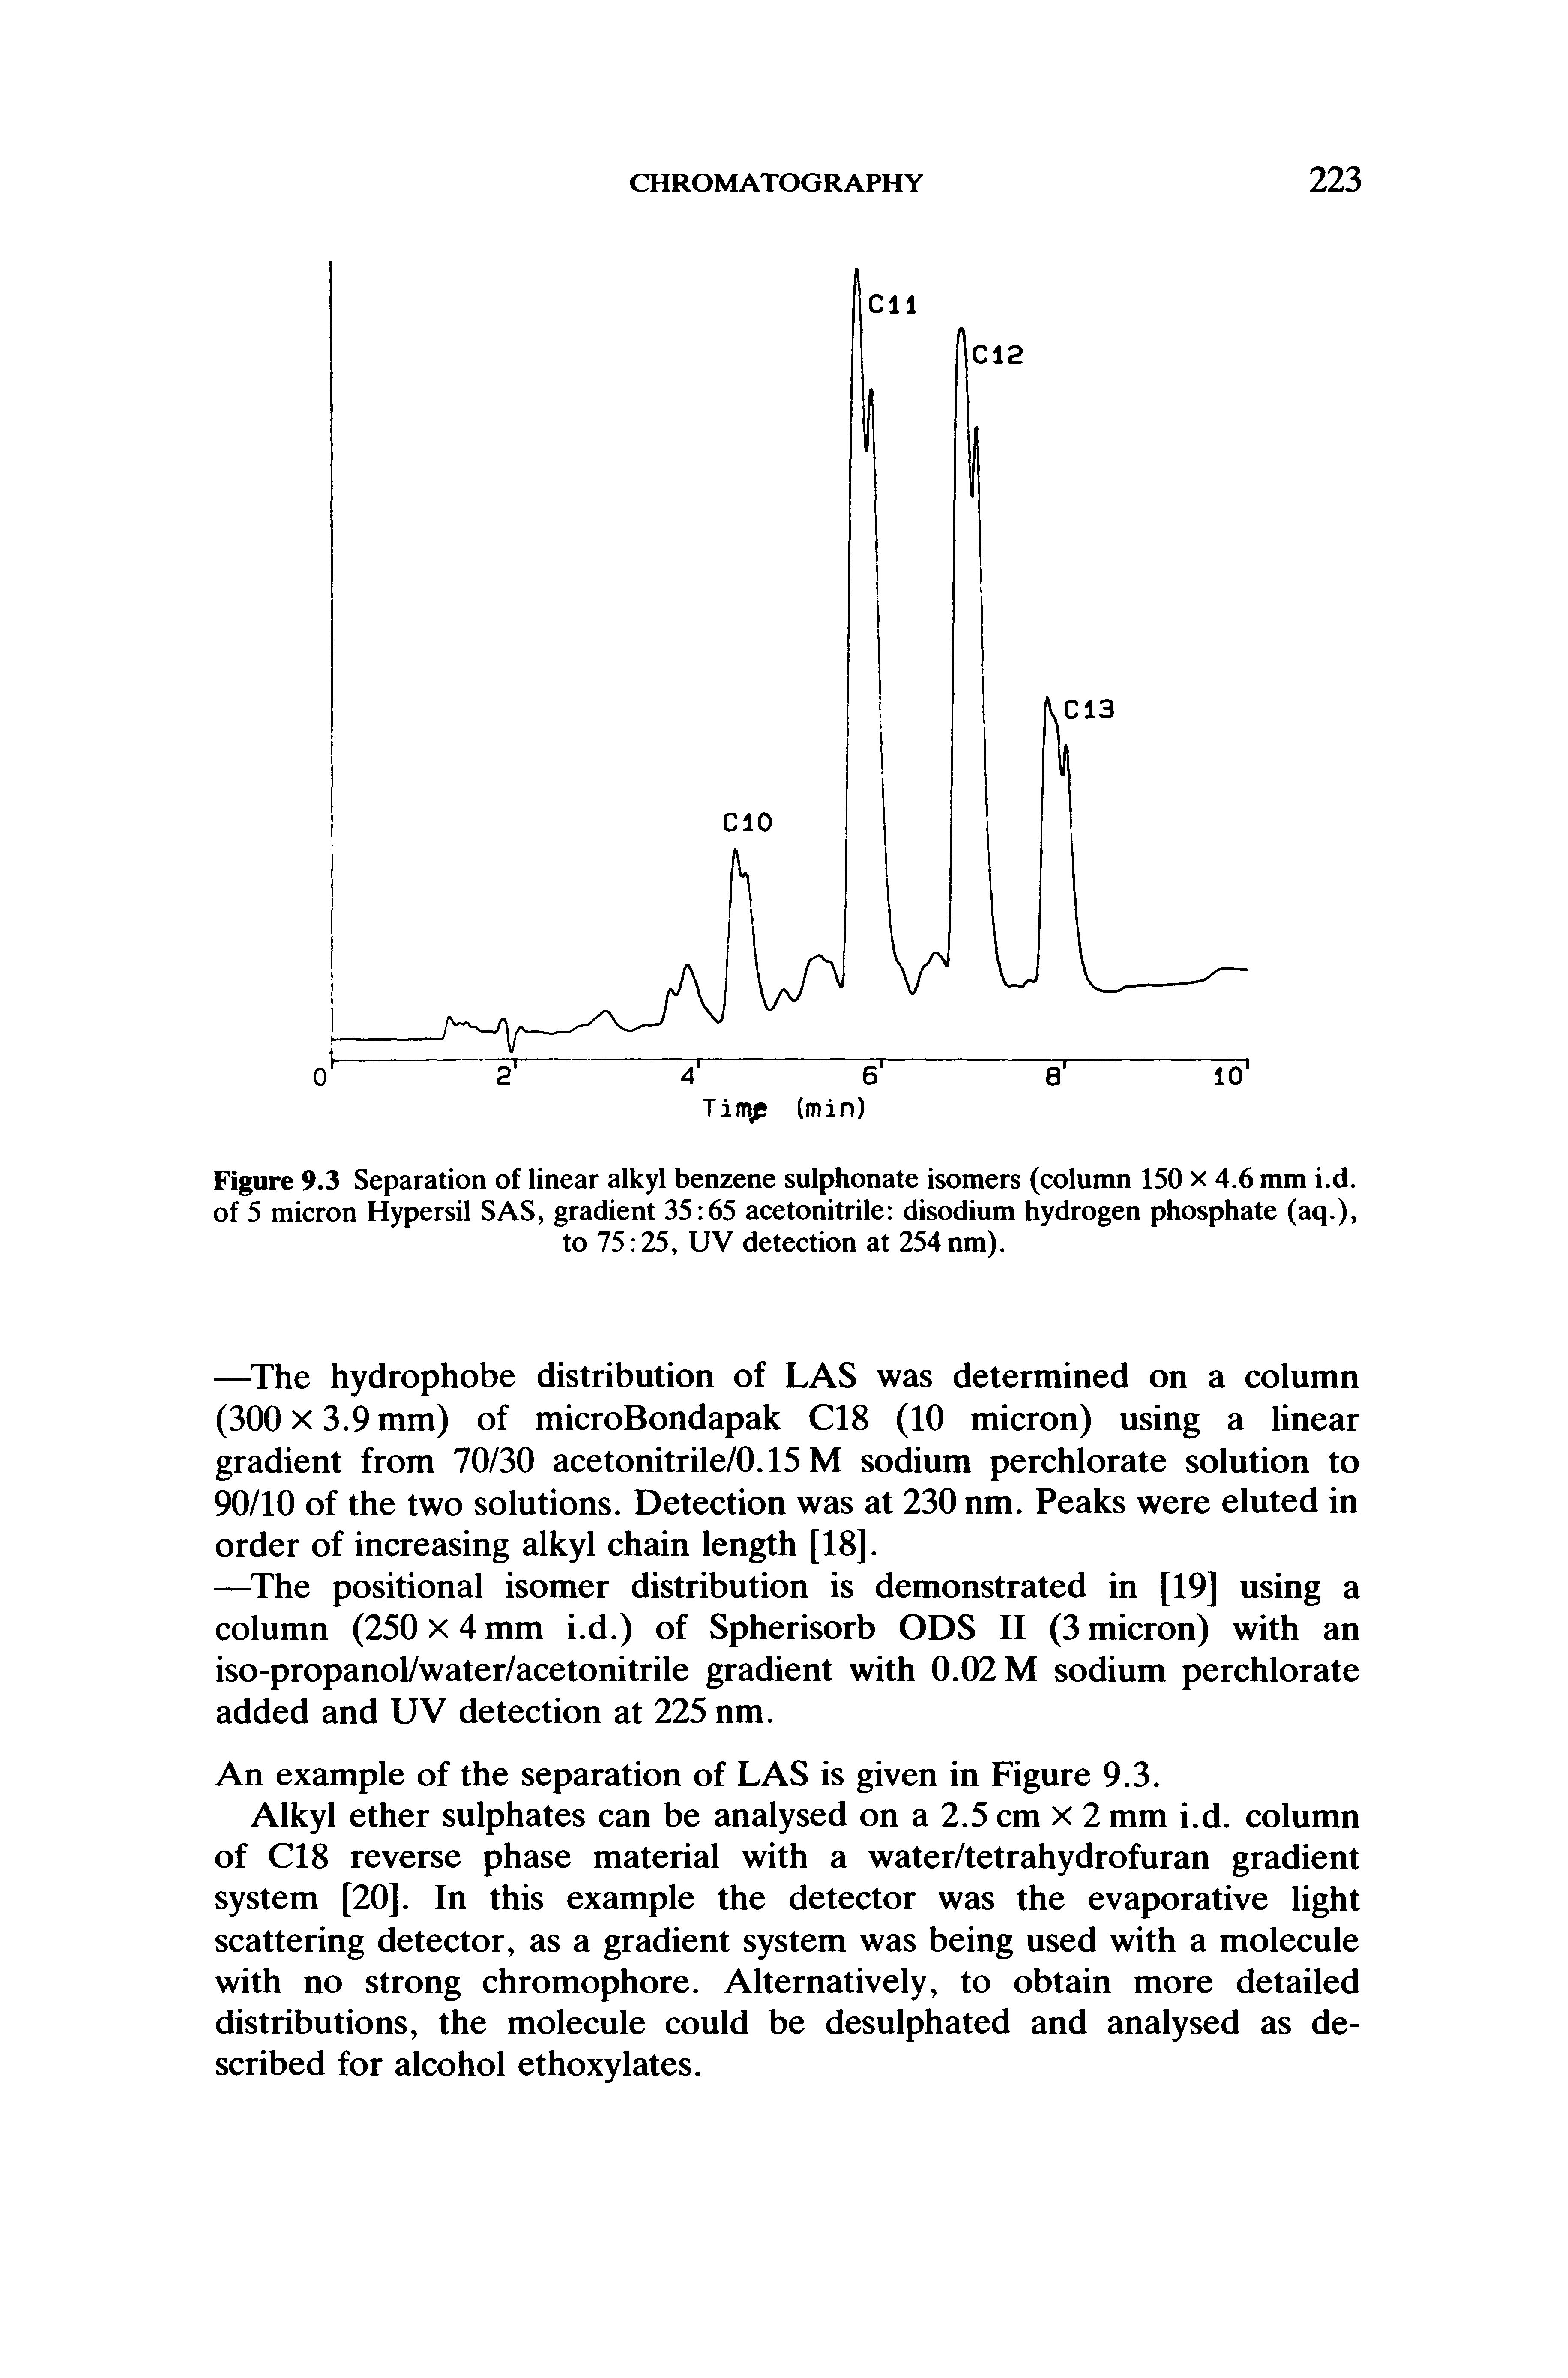 Figure 9.3 Separation of linear alkyl benzene sulphonate isomers (column 150 x 4.6 mm i.d. of 5 micron Hypersil SAS, gradient 35 65 acetonitrile disodium hydrogen phosphate (aq.), to 75 25, UV detection at 254 nm).